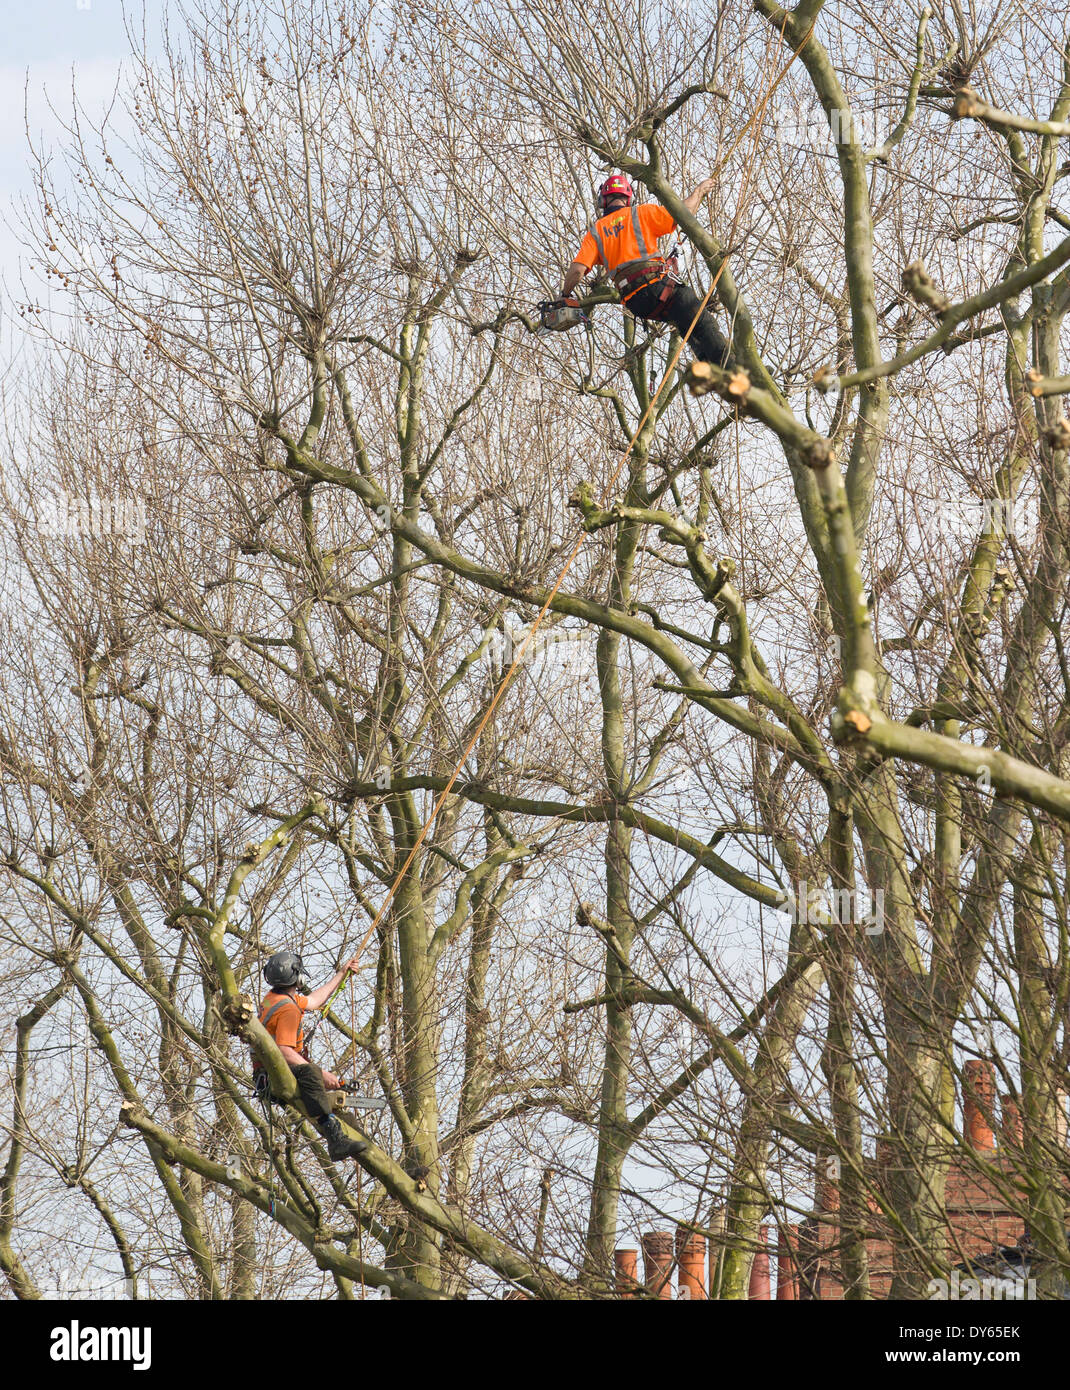 UK, London : Tree Surgeons at work on a residential street in Islington, North London on 17 March, 2014. Stock Photo